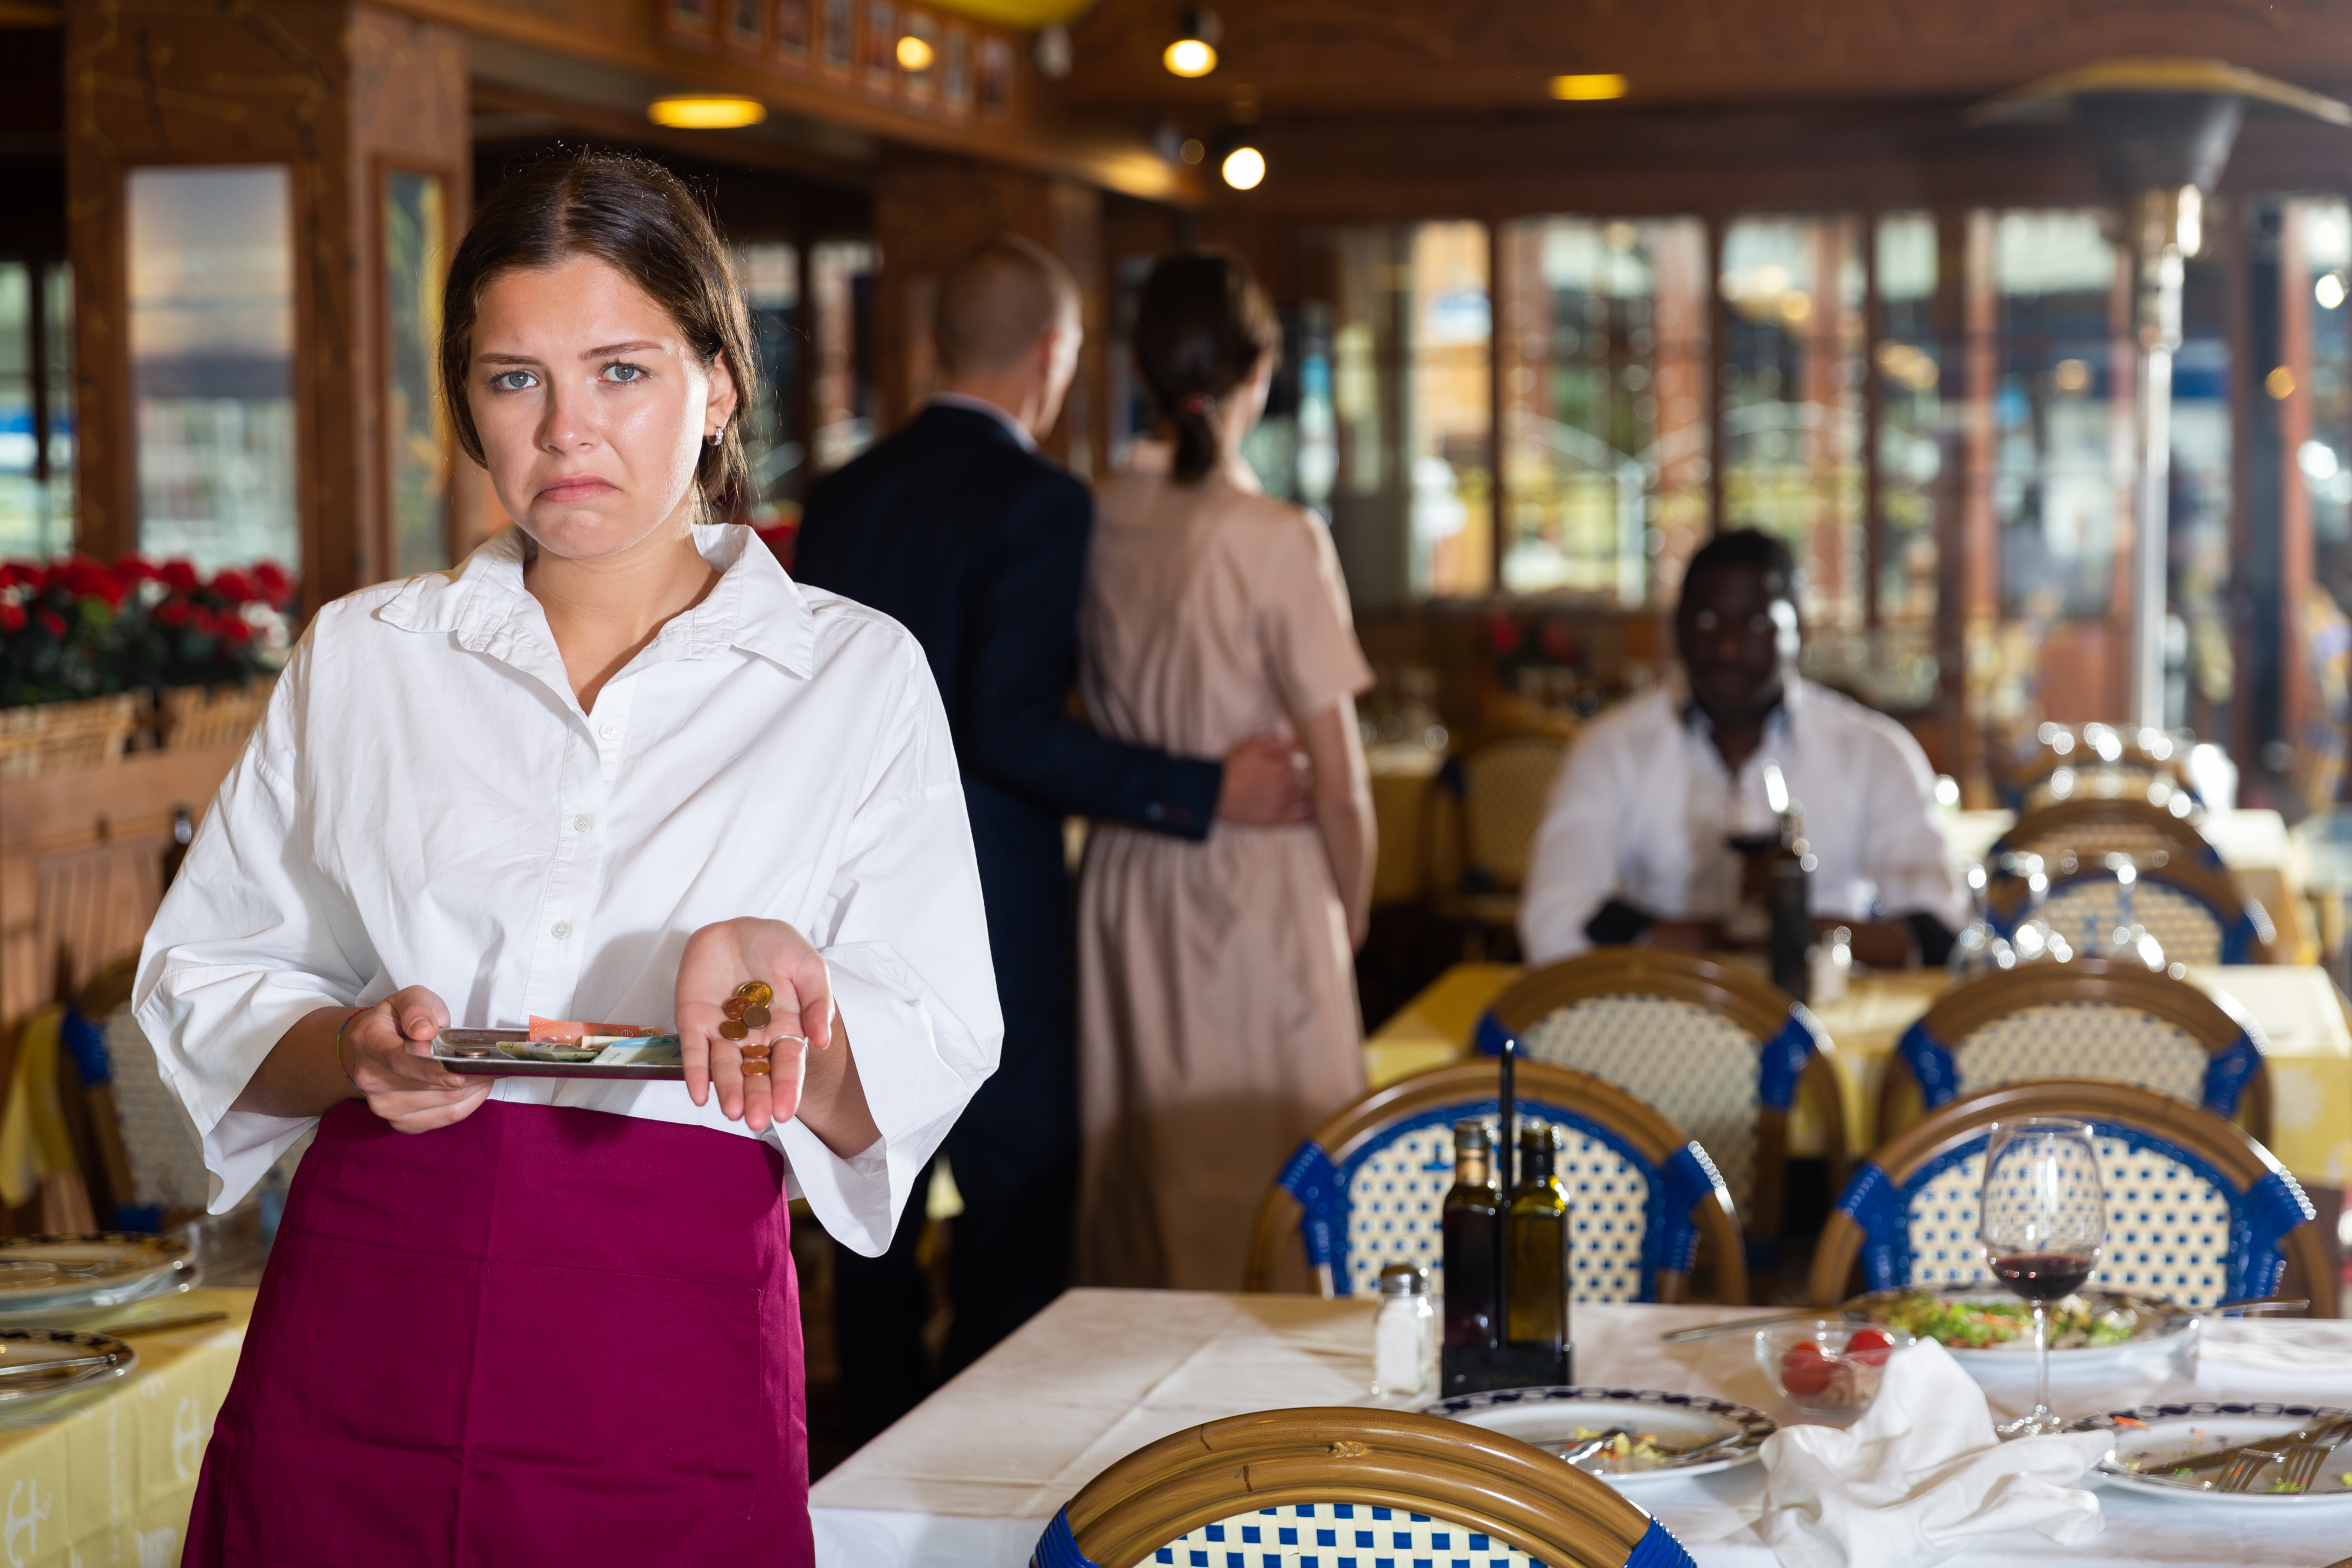 A restaurant waitress looks displeased while holding an empty tray. In the background, a couple embraces, and a man dines alone